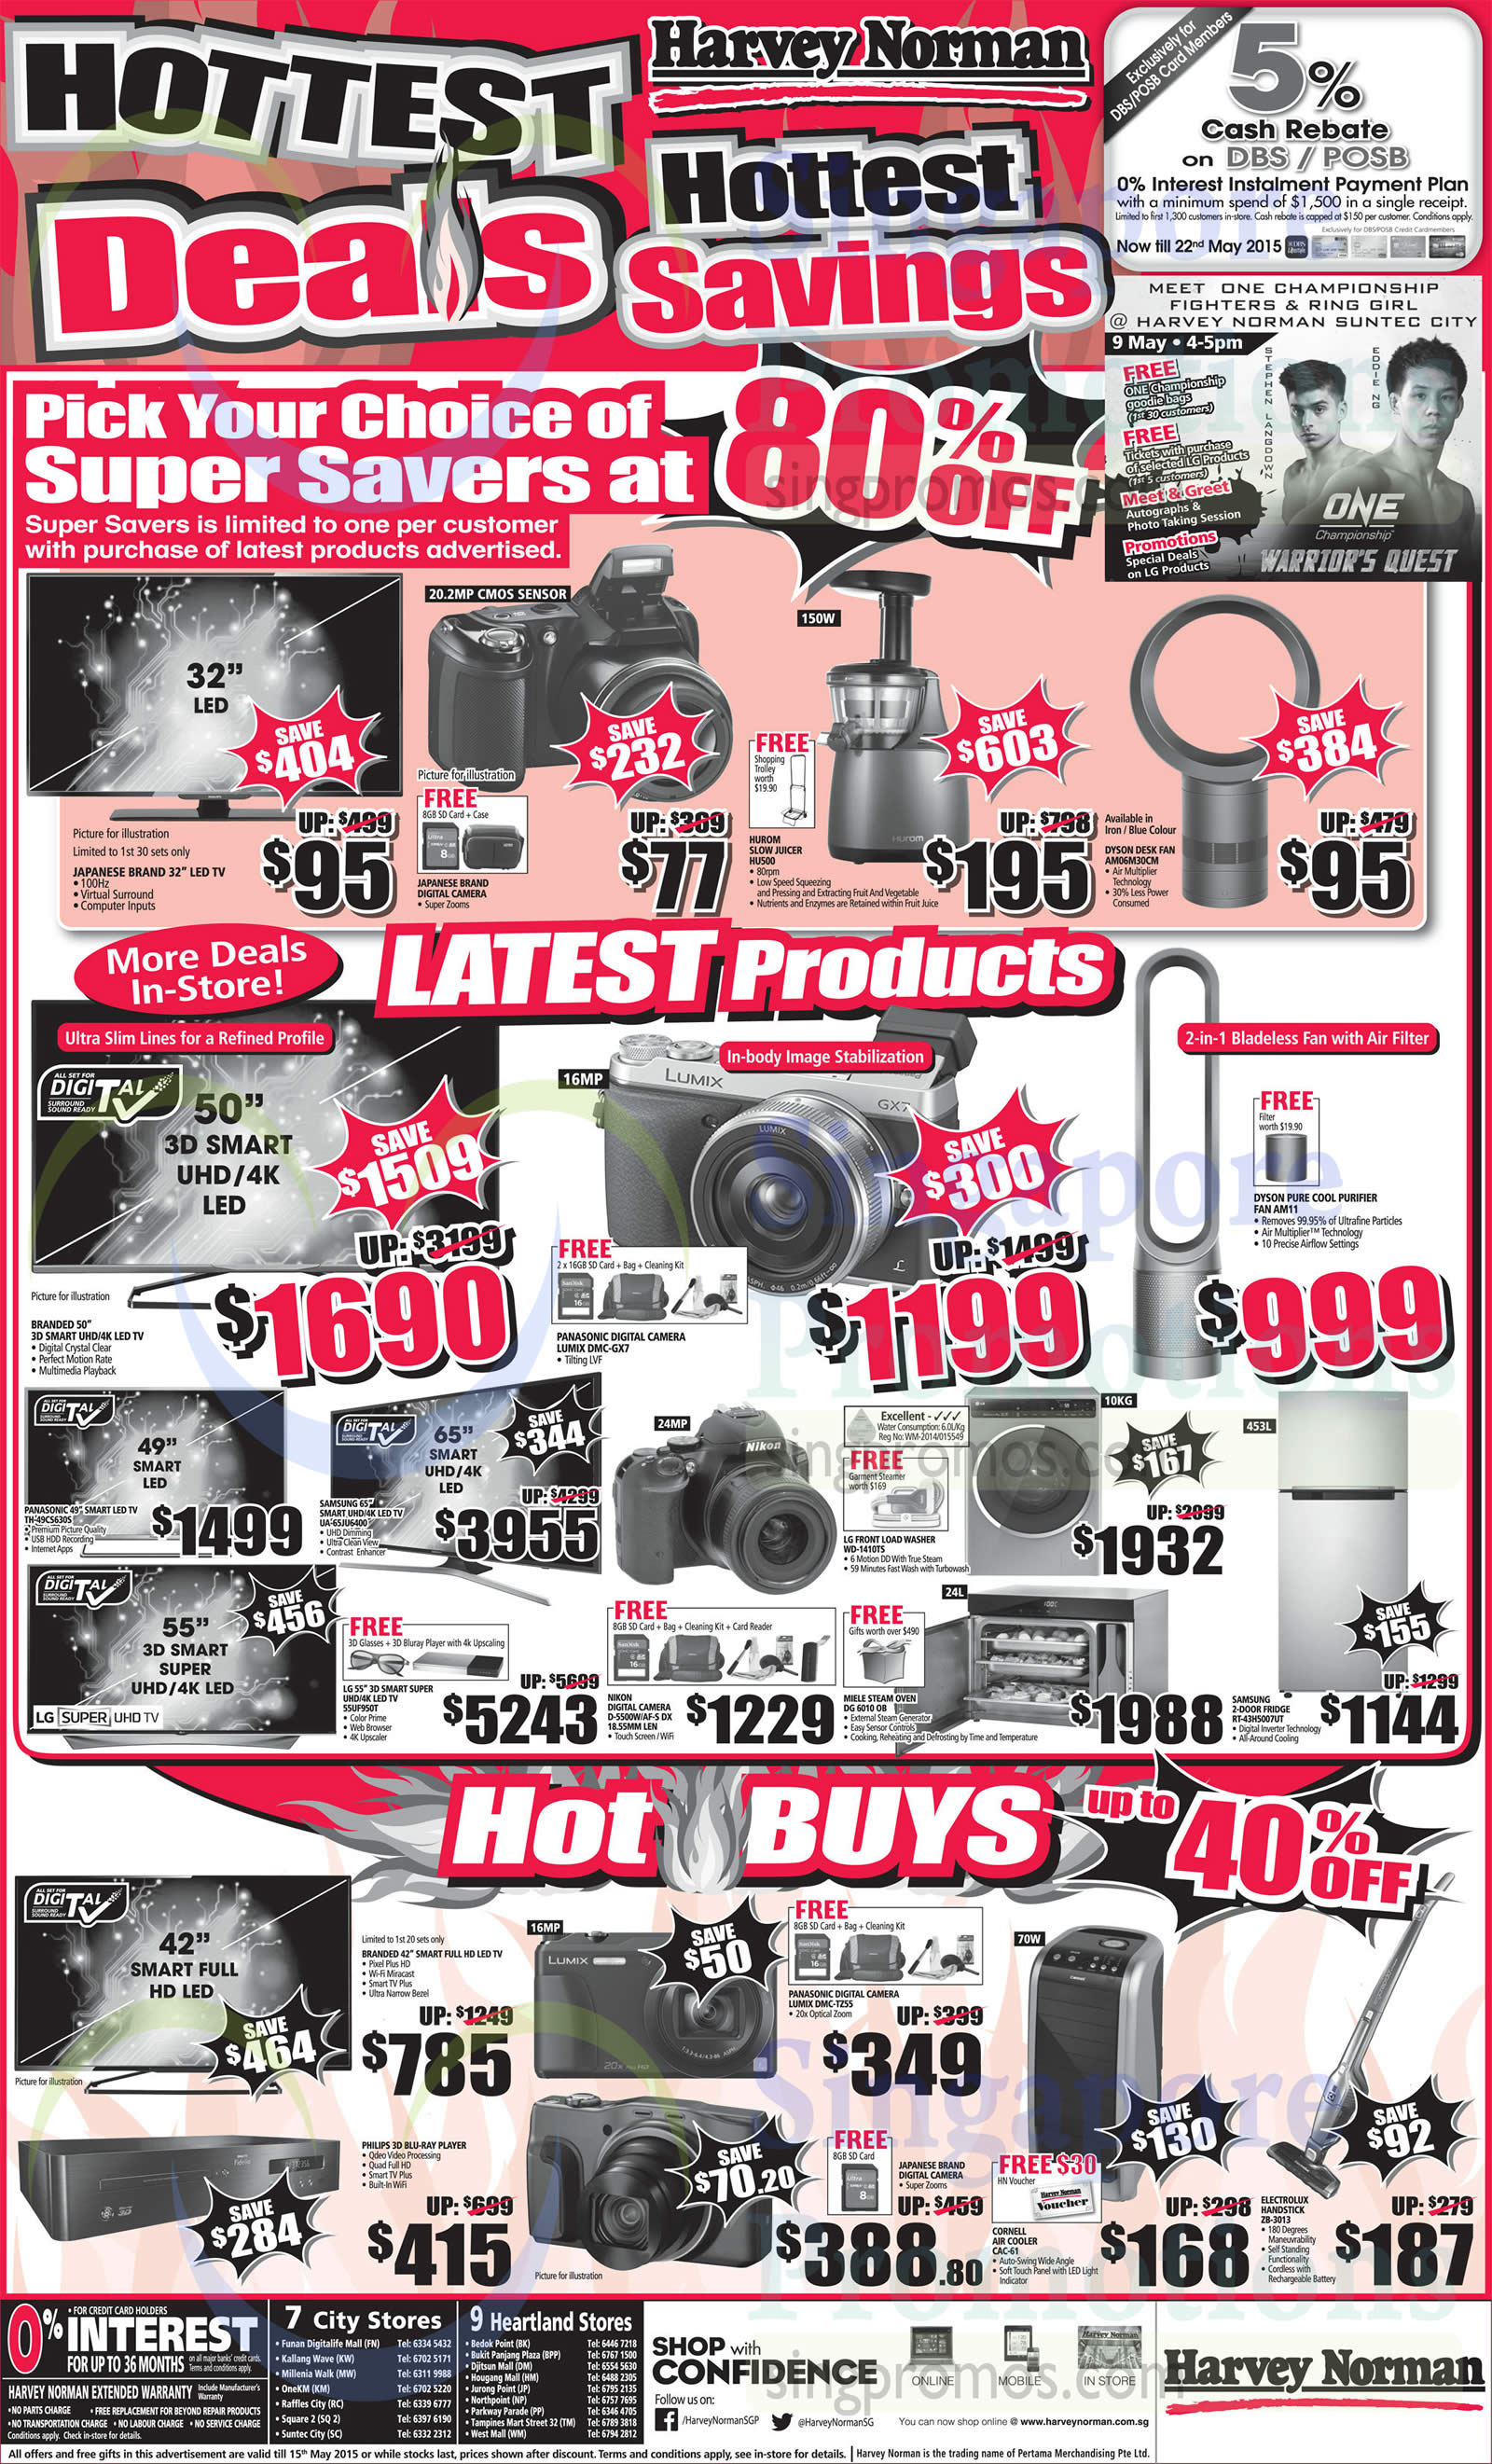 Featured image for Harvey Norman Electronics, IT, Appliances & Other Offers 9 - 15 May 2015